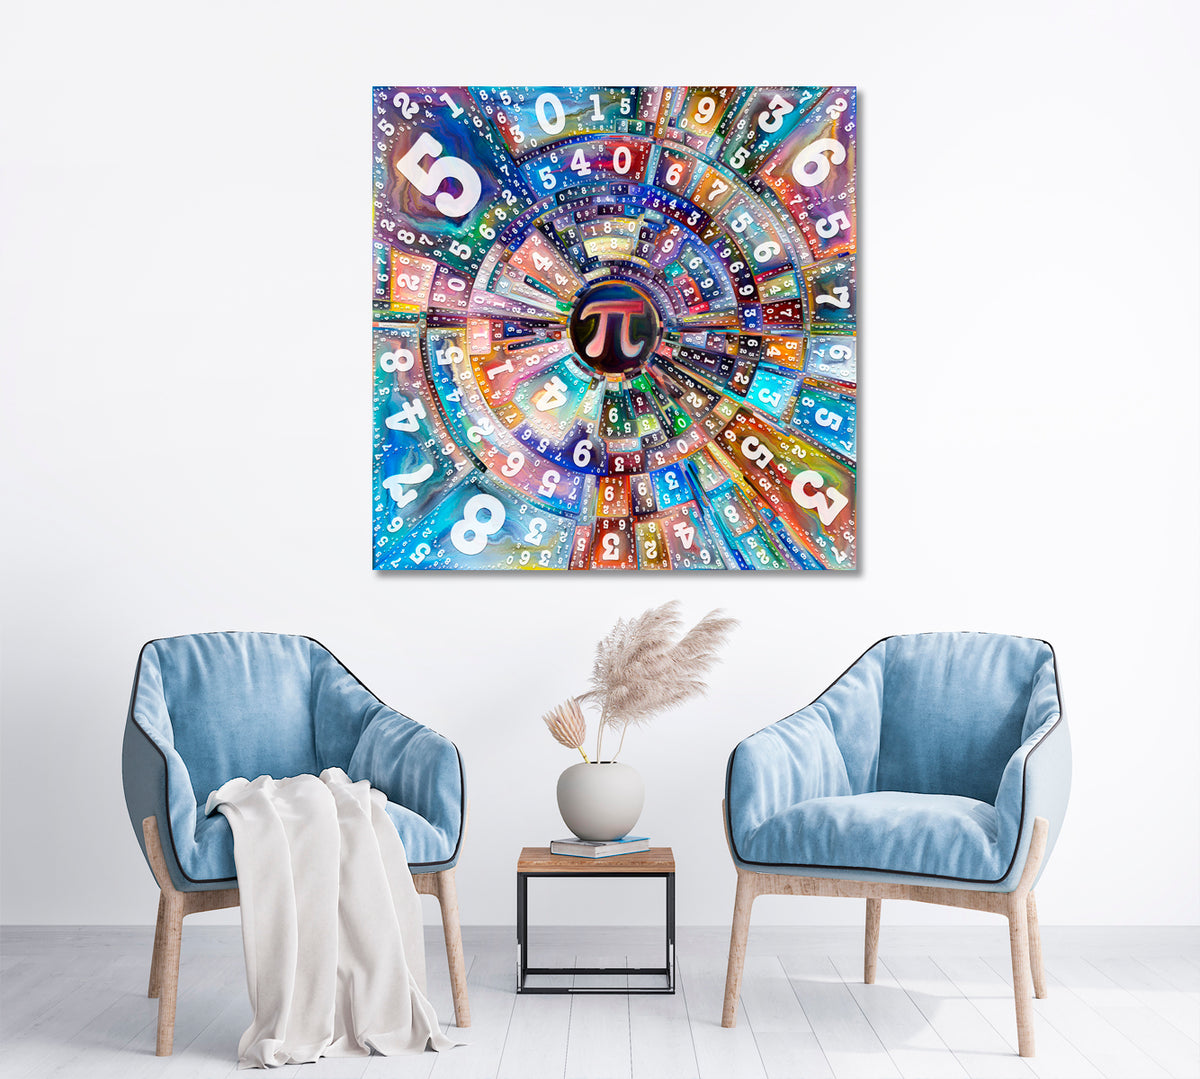 NUMBERS Energy And Power Behind Life Abstract Art Print Artesty 1 Panel 12"x12" 